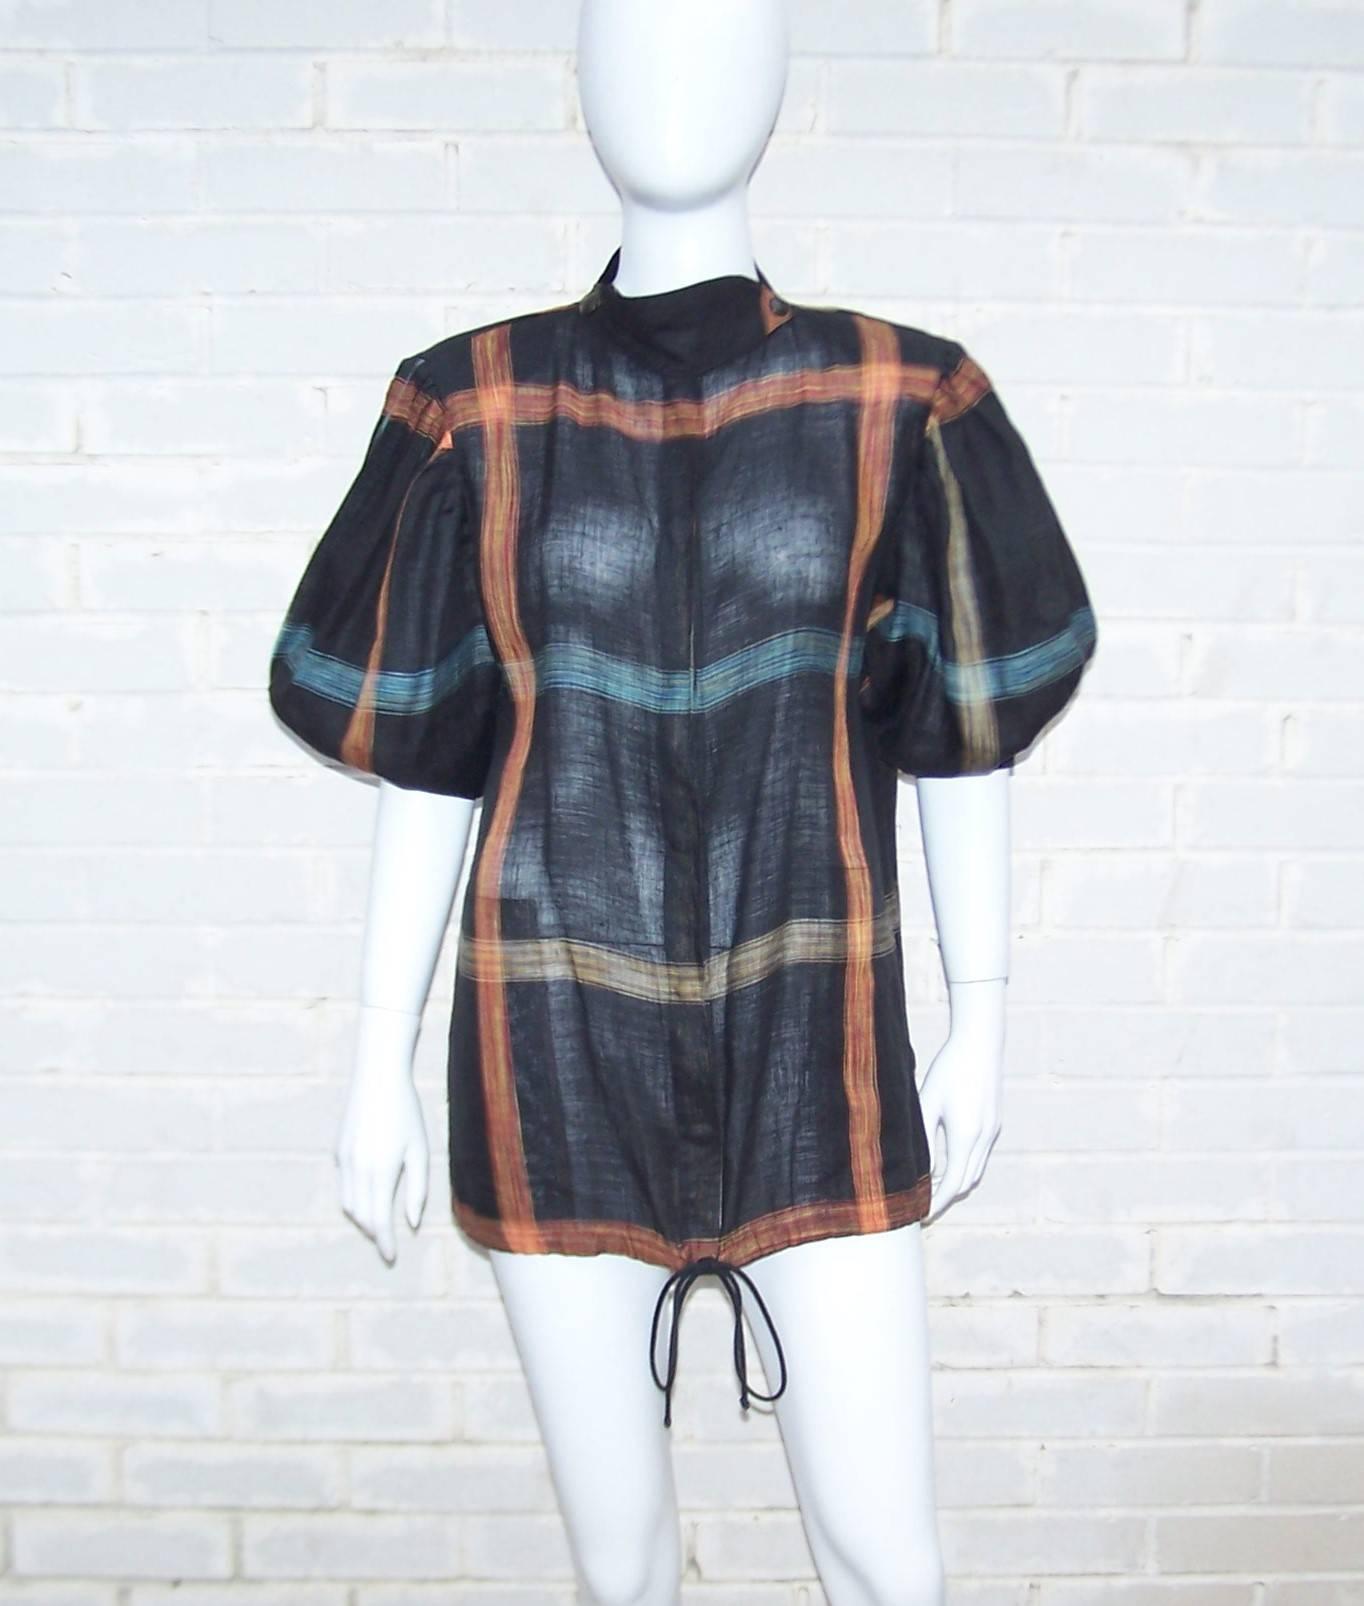 Krizia uses a vibrant windowpane flax linen fabric to create a comfortably stylish tunic top with interesting details including a crossover snap collar, faux drawstring hem and pleated puffed sleeves.  The black background of the fabric is accented